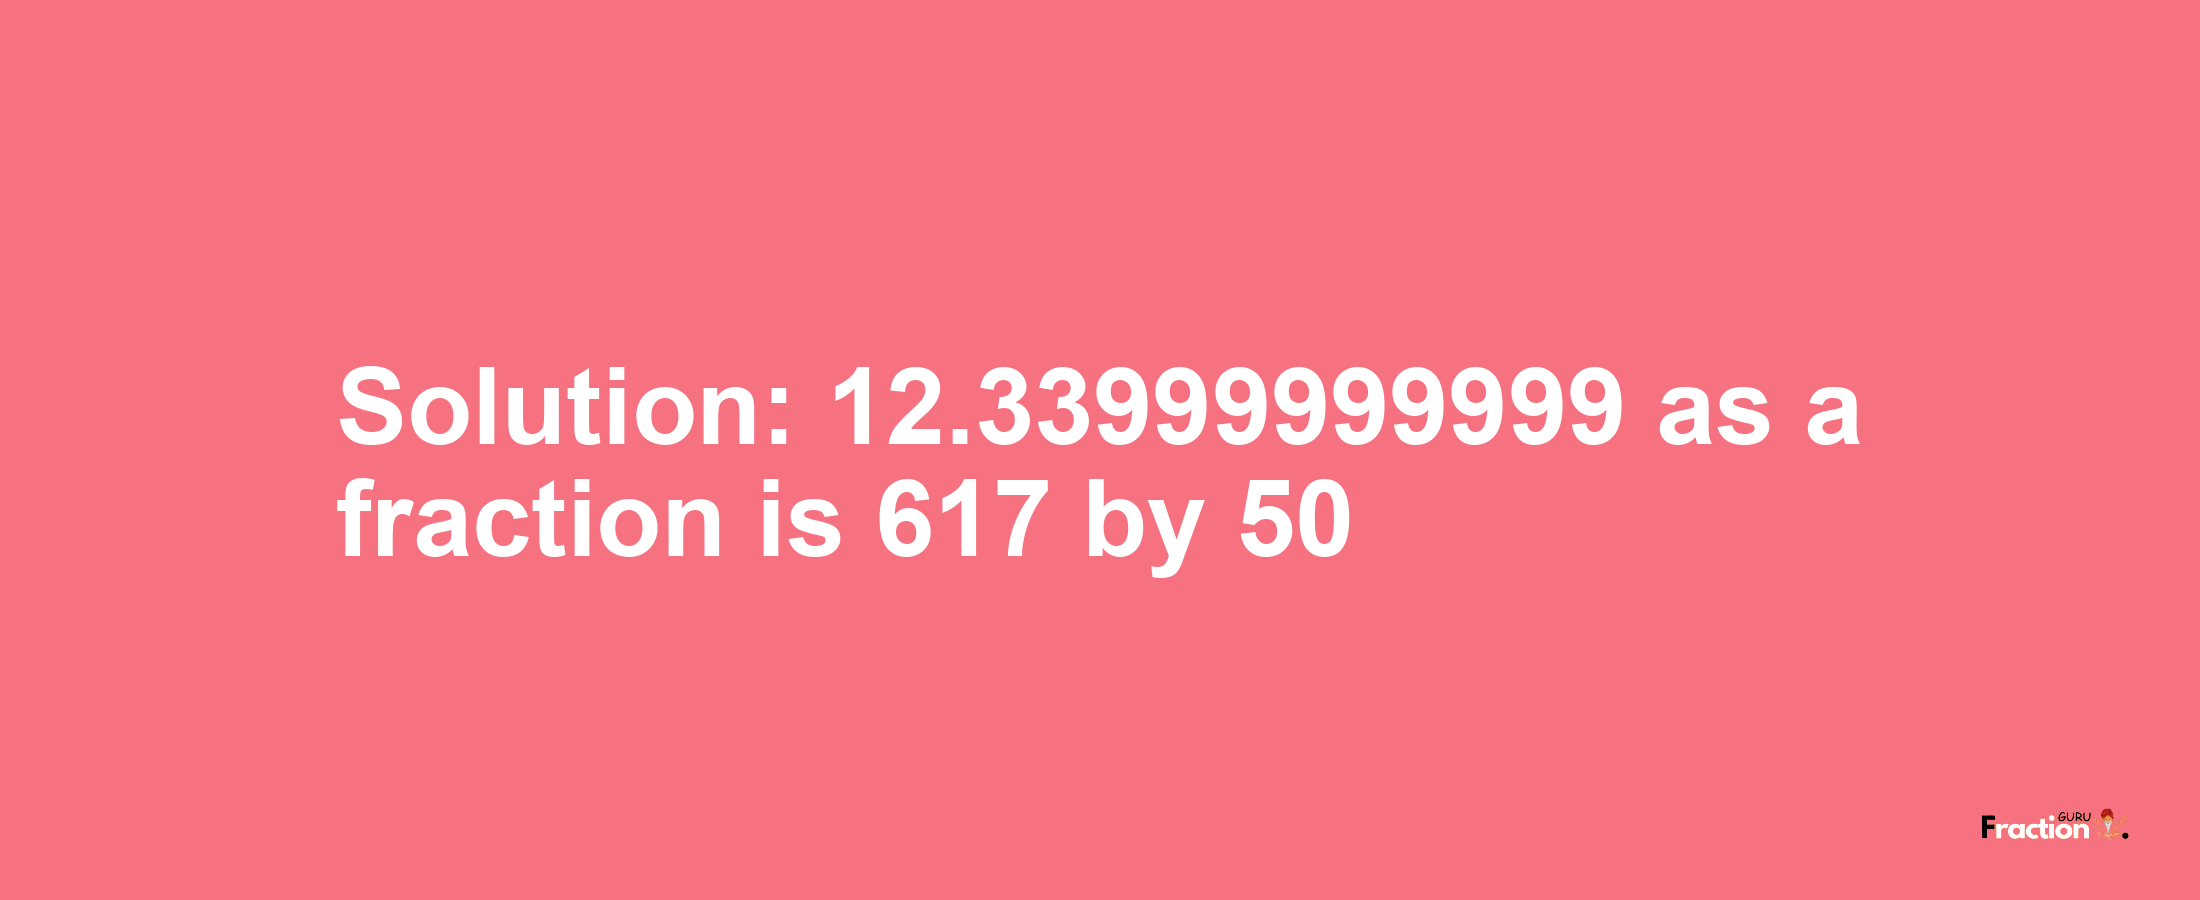 Solution:12.33999999999 as a fraction is 617/50